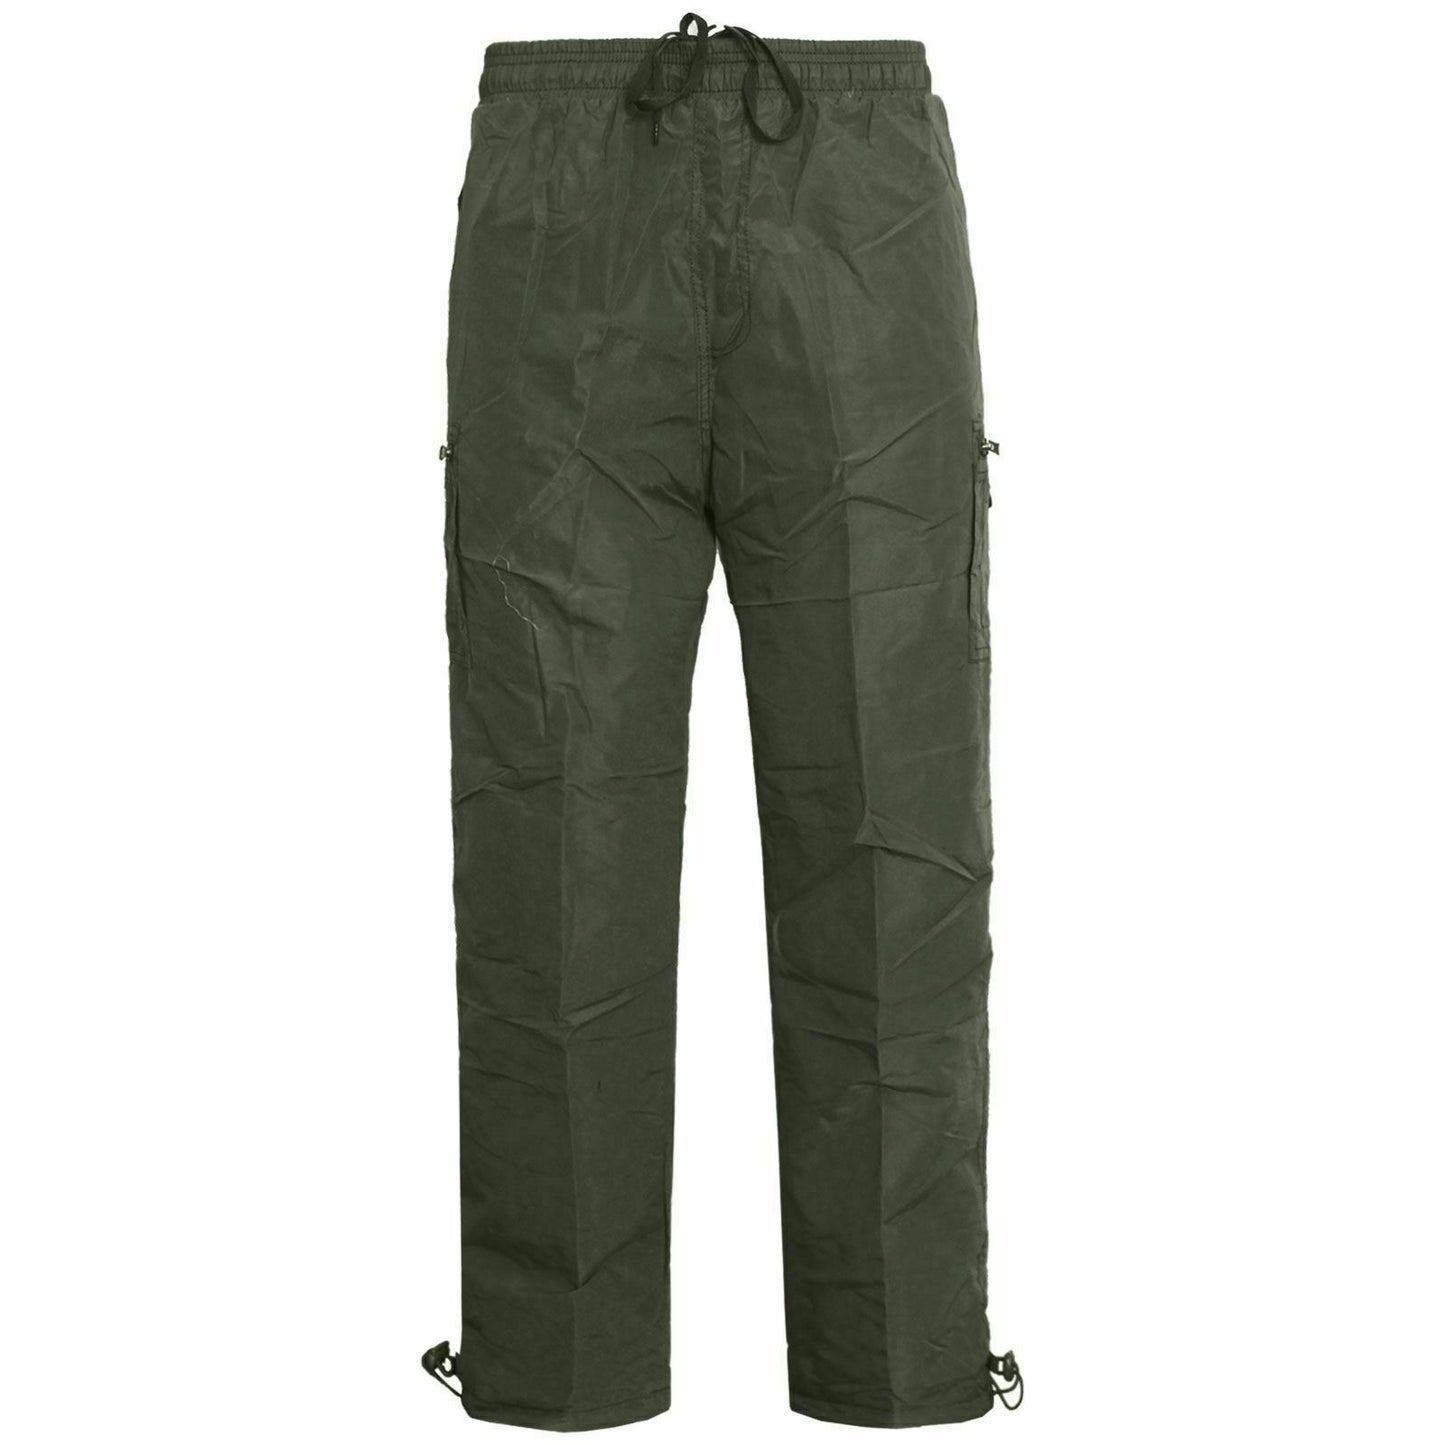 MENS FLEECE LINED THERMAL TROUSERS WINTER CASUAL ELASTICATED WAIST CARGO PANTS